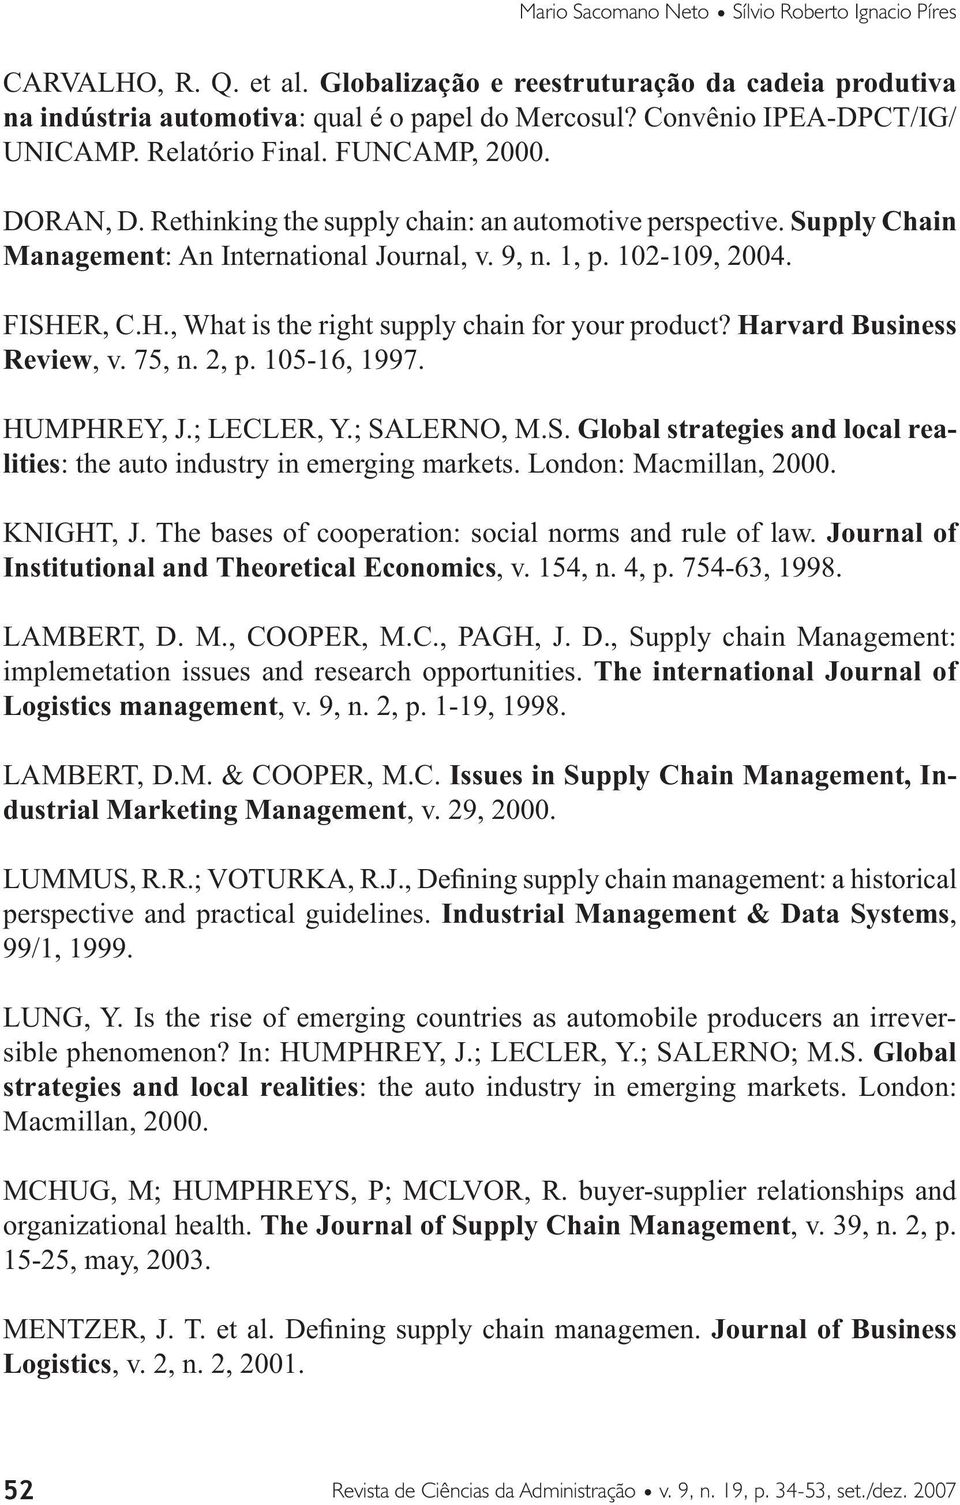 102-109, 2004. FISHER, C.H., What is the right supply chain for your product? Harvard Business Review, v. 75, n. 2, p. 105-16, 1997. HUMPHREY, J.; LECLER, Y.; SALERNO, M.S. Global strategies and local realities: the auto industry in emerging markets.